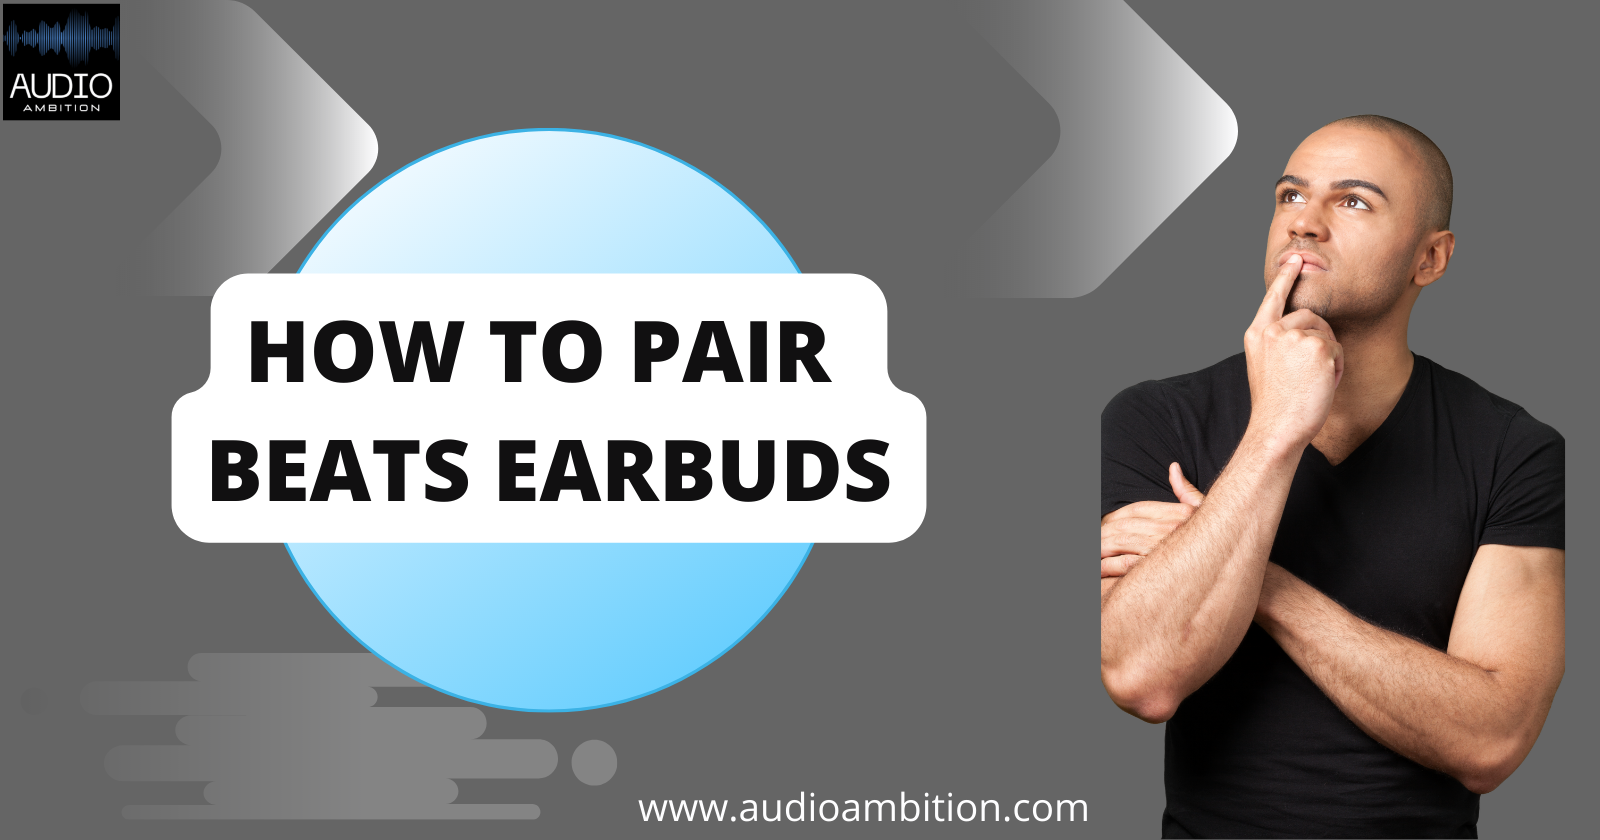 How to Pair Beats Earbuds